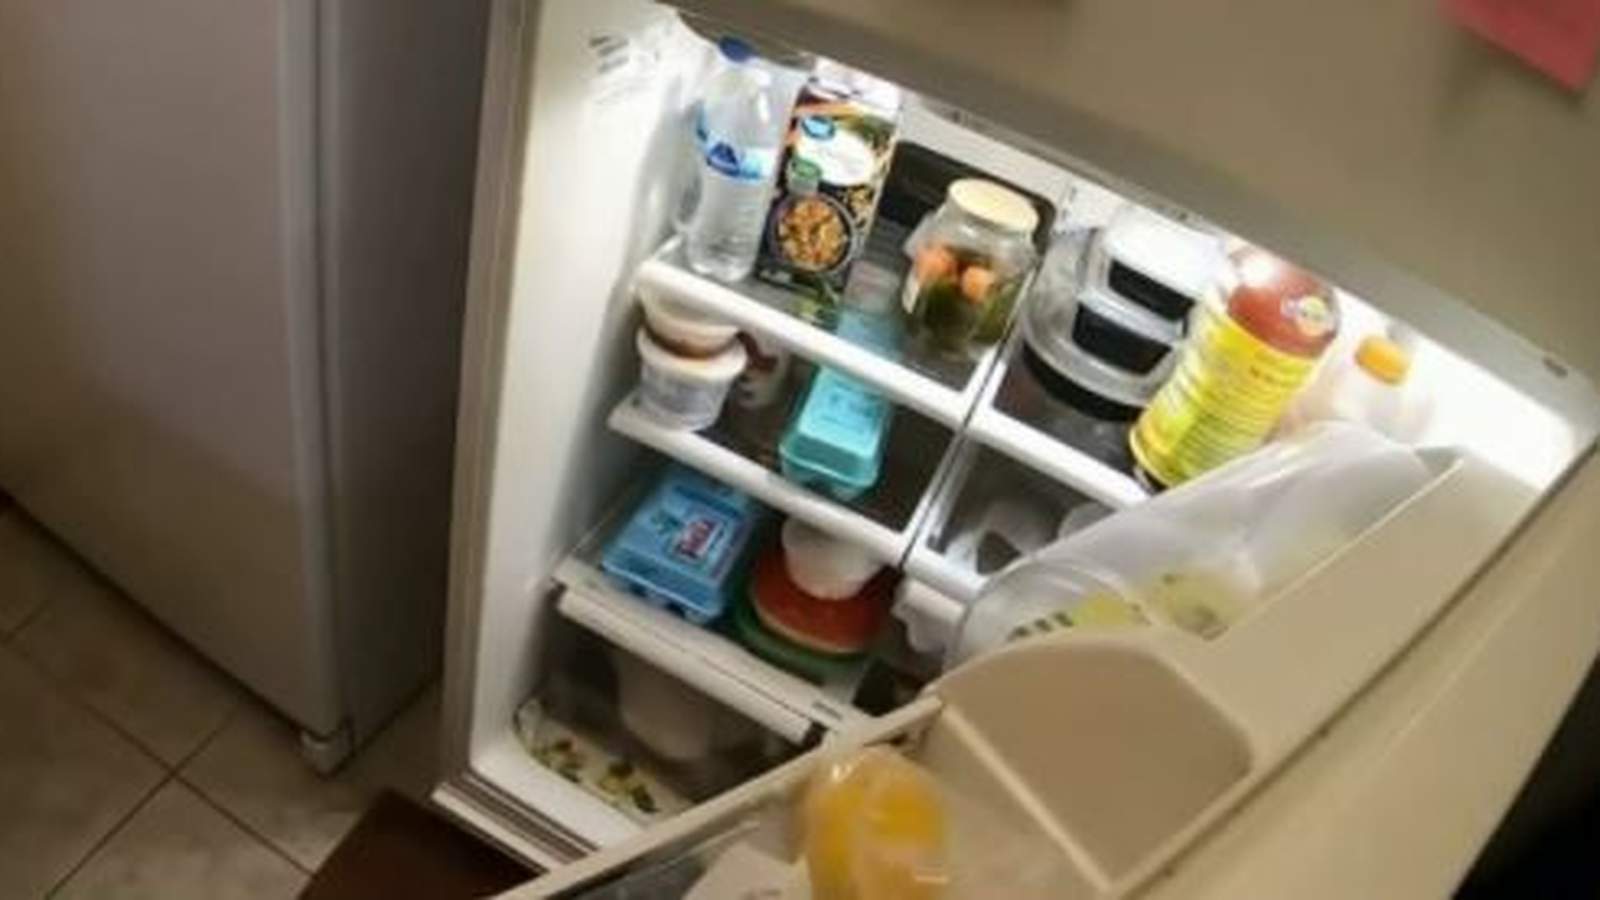 Sears stalls for months replacing woman’s leaky fridge under warranty